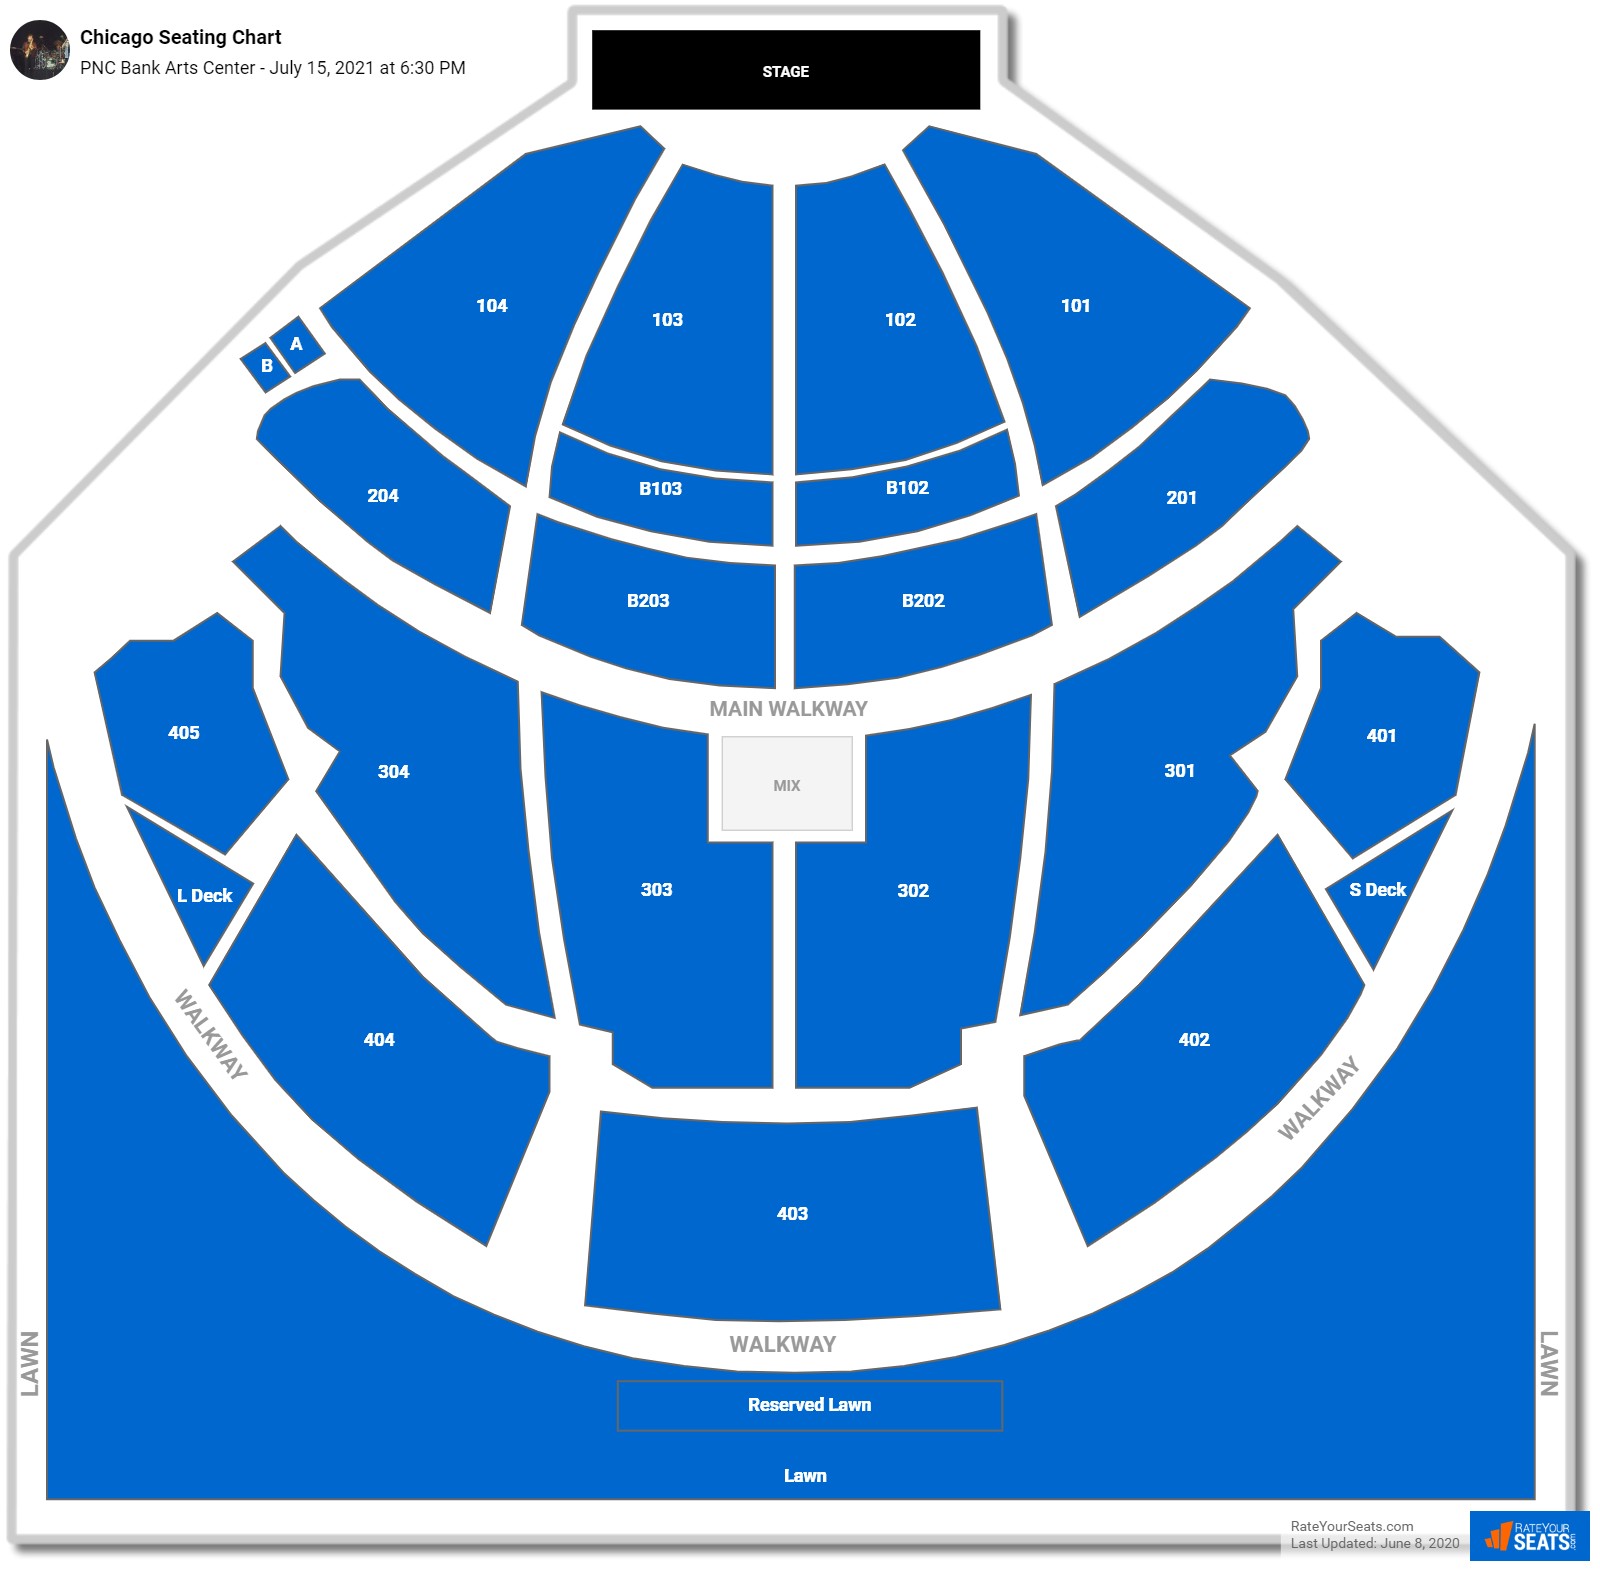 Pnc Arts Center Seating Chart 3d